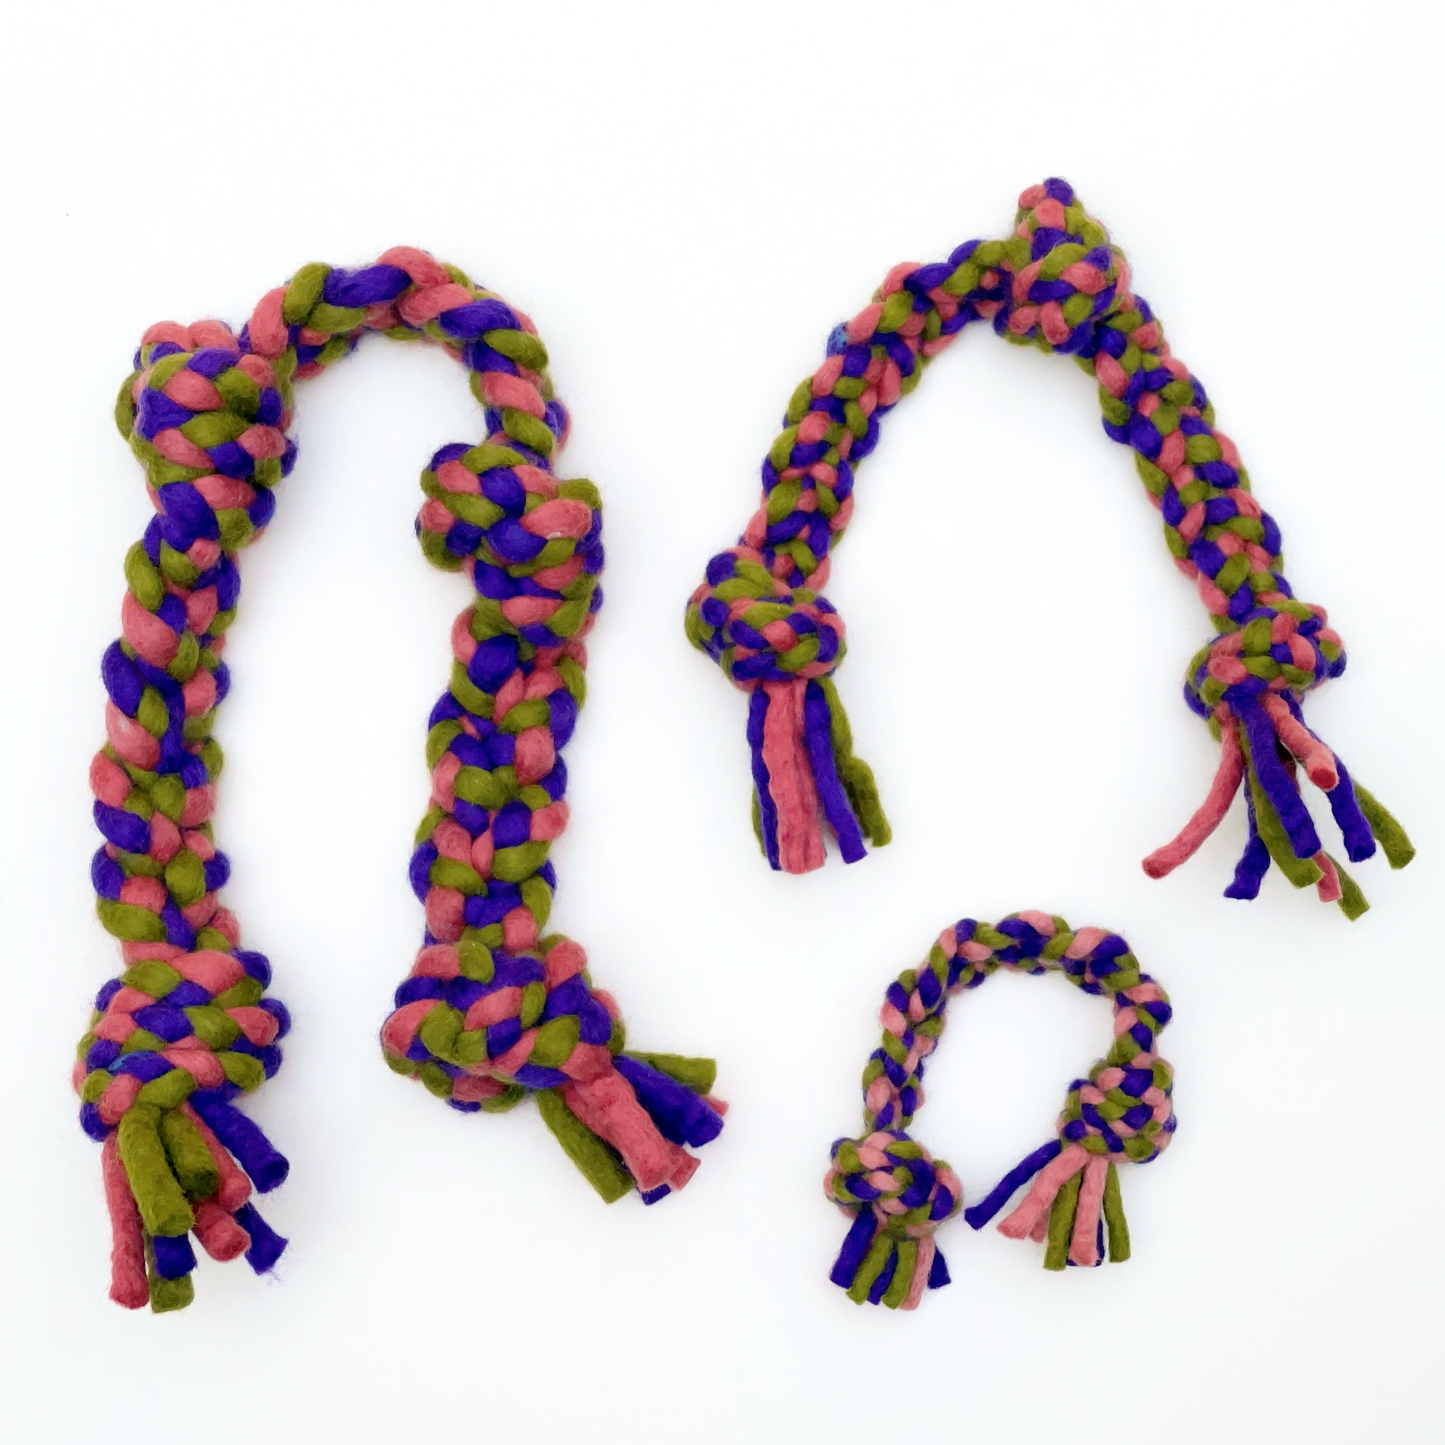 Knotted Rope Dog Toy, Purple/Pink